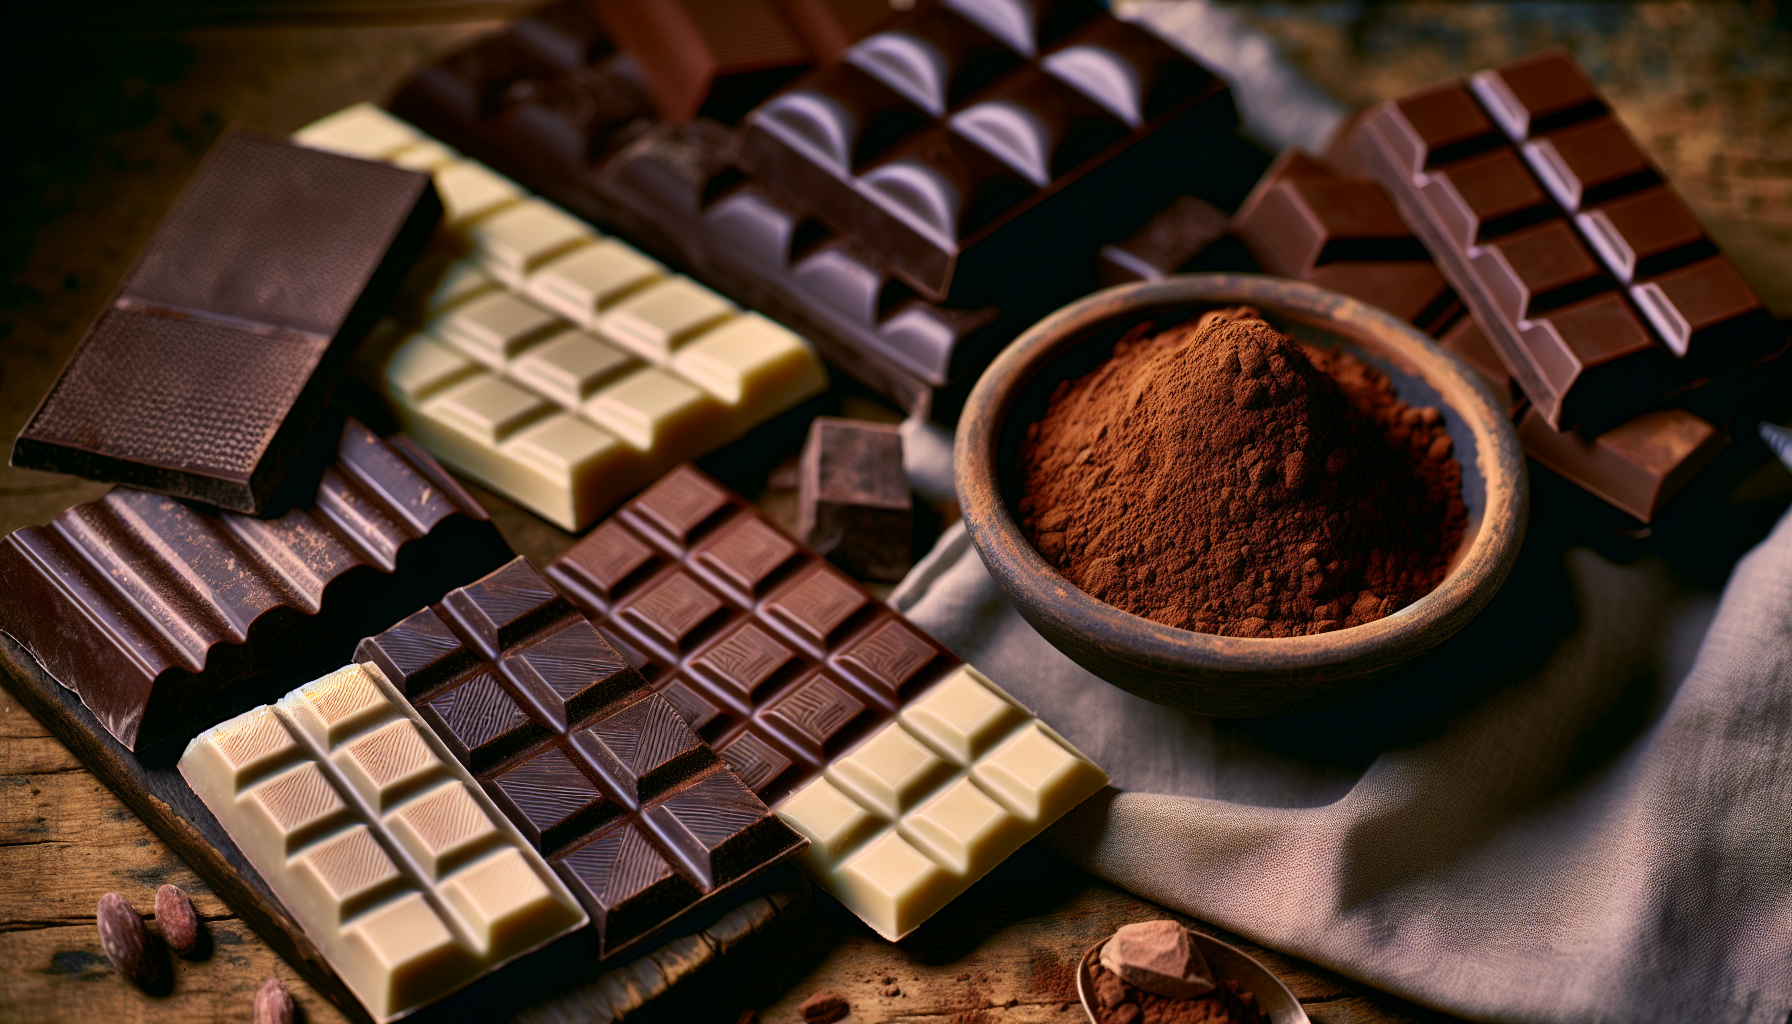 Various types of chocolate bars and cocoa powder